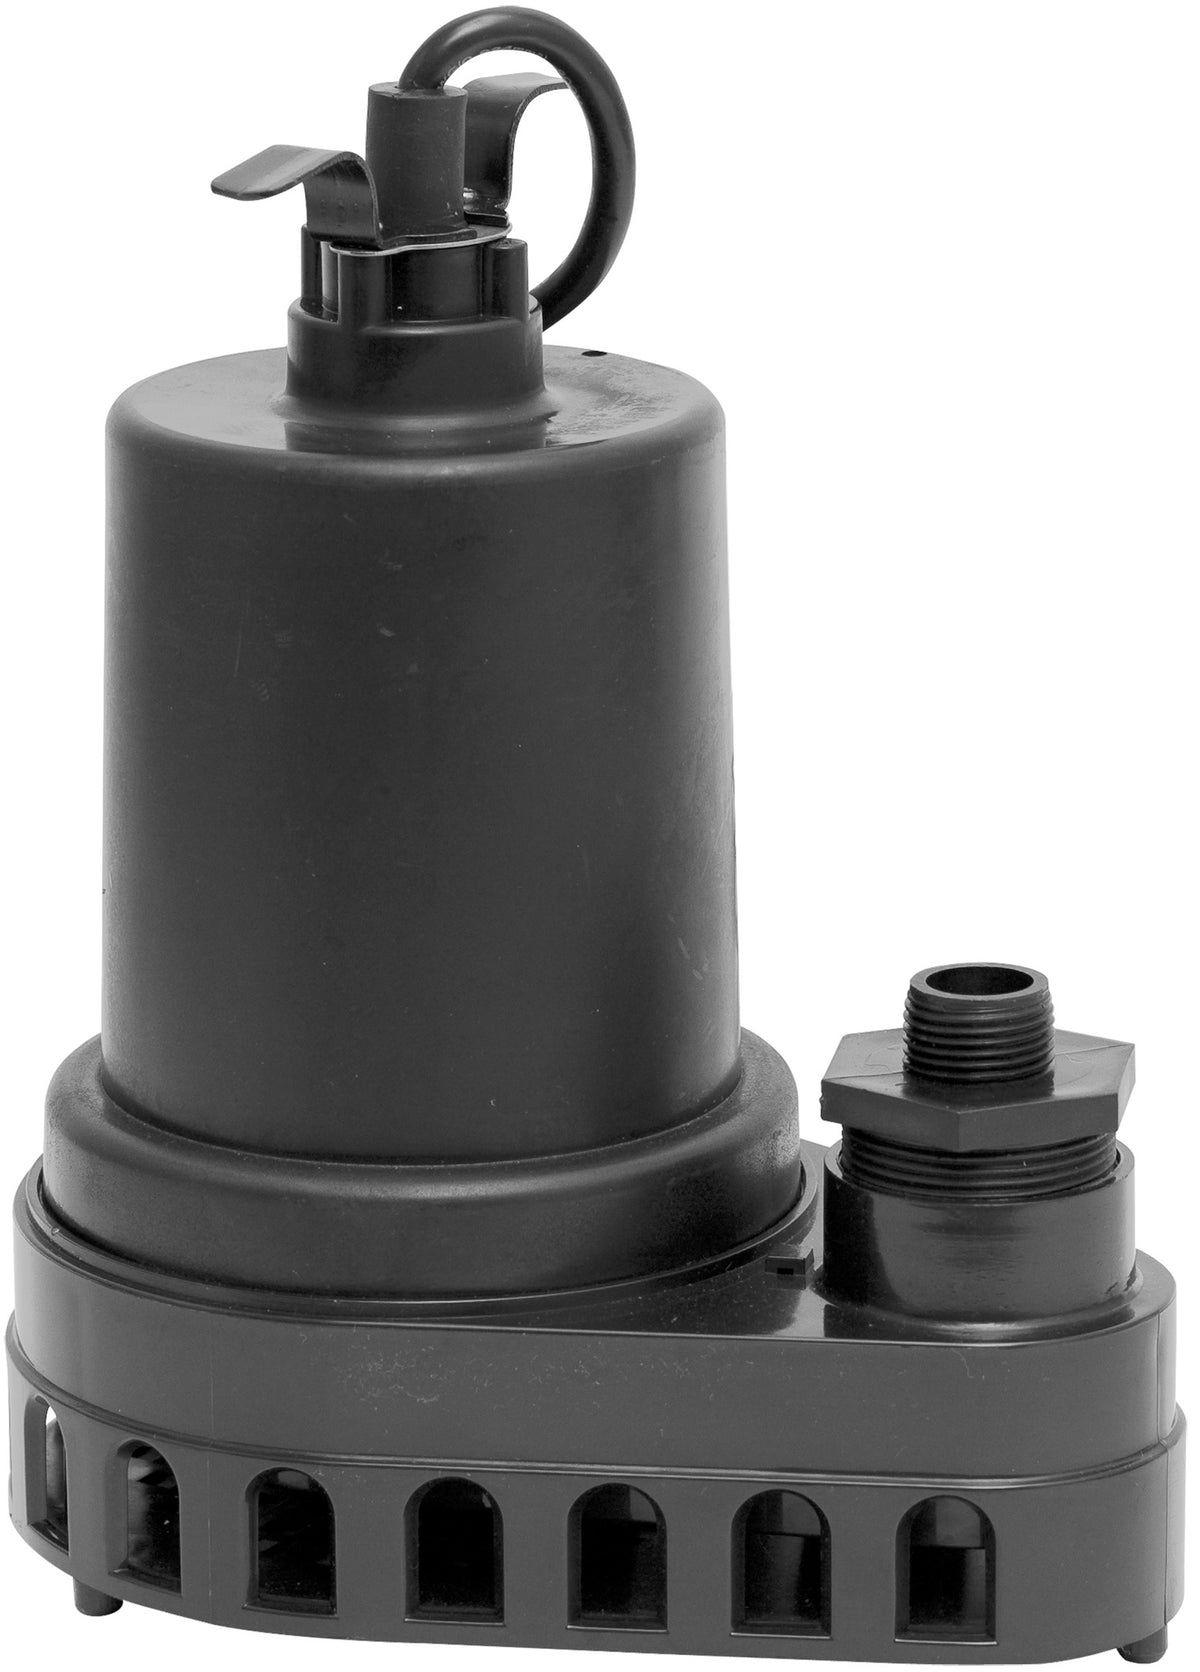 Superior Pump 91570 Thermoplastic Submersible Utility Pump, 1/2 HP